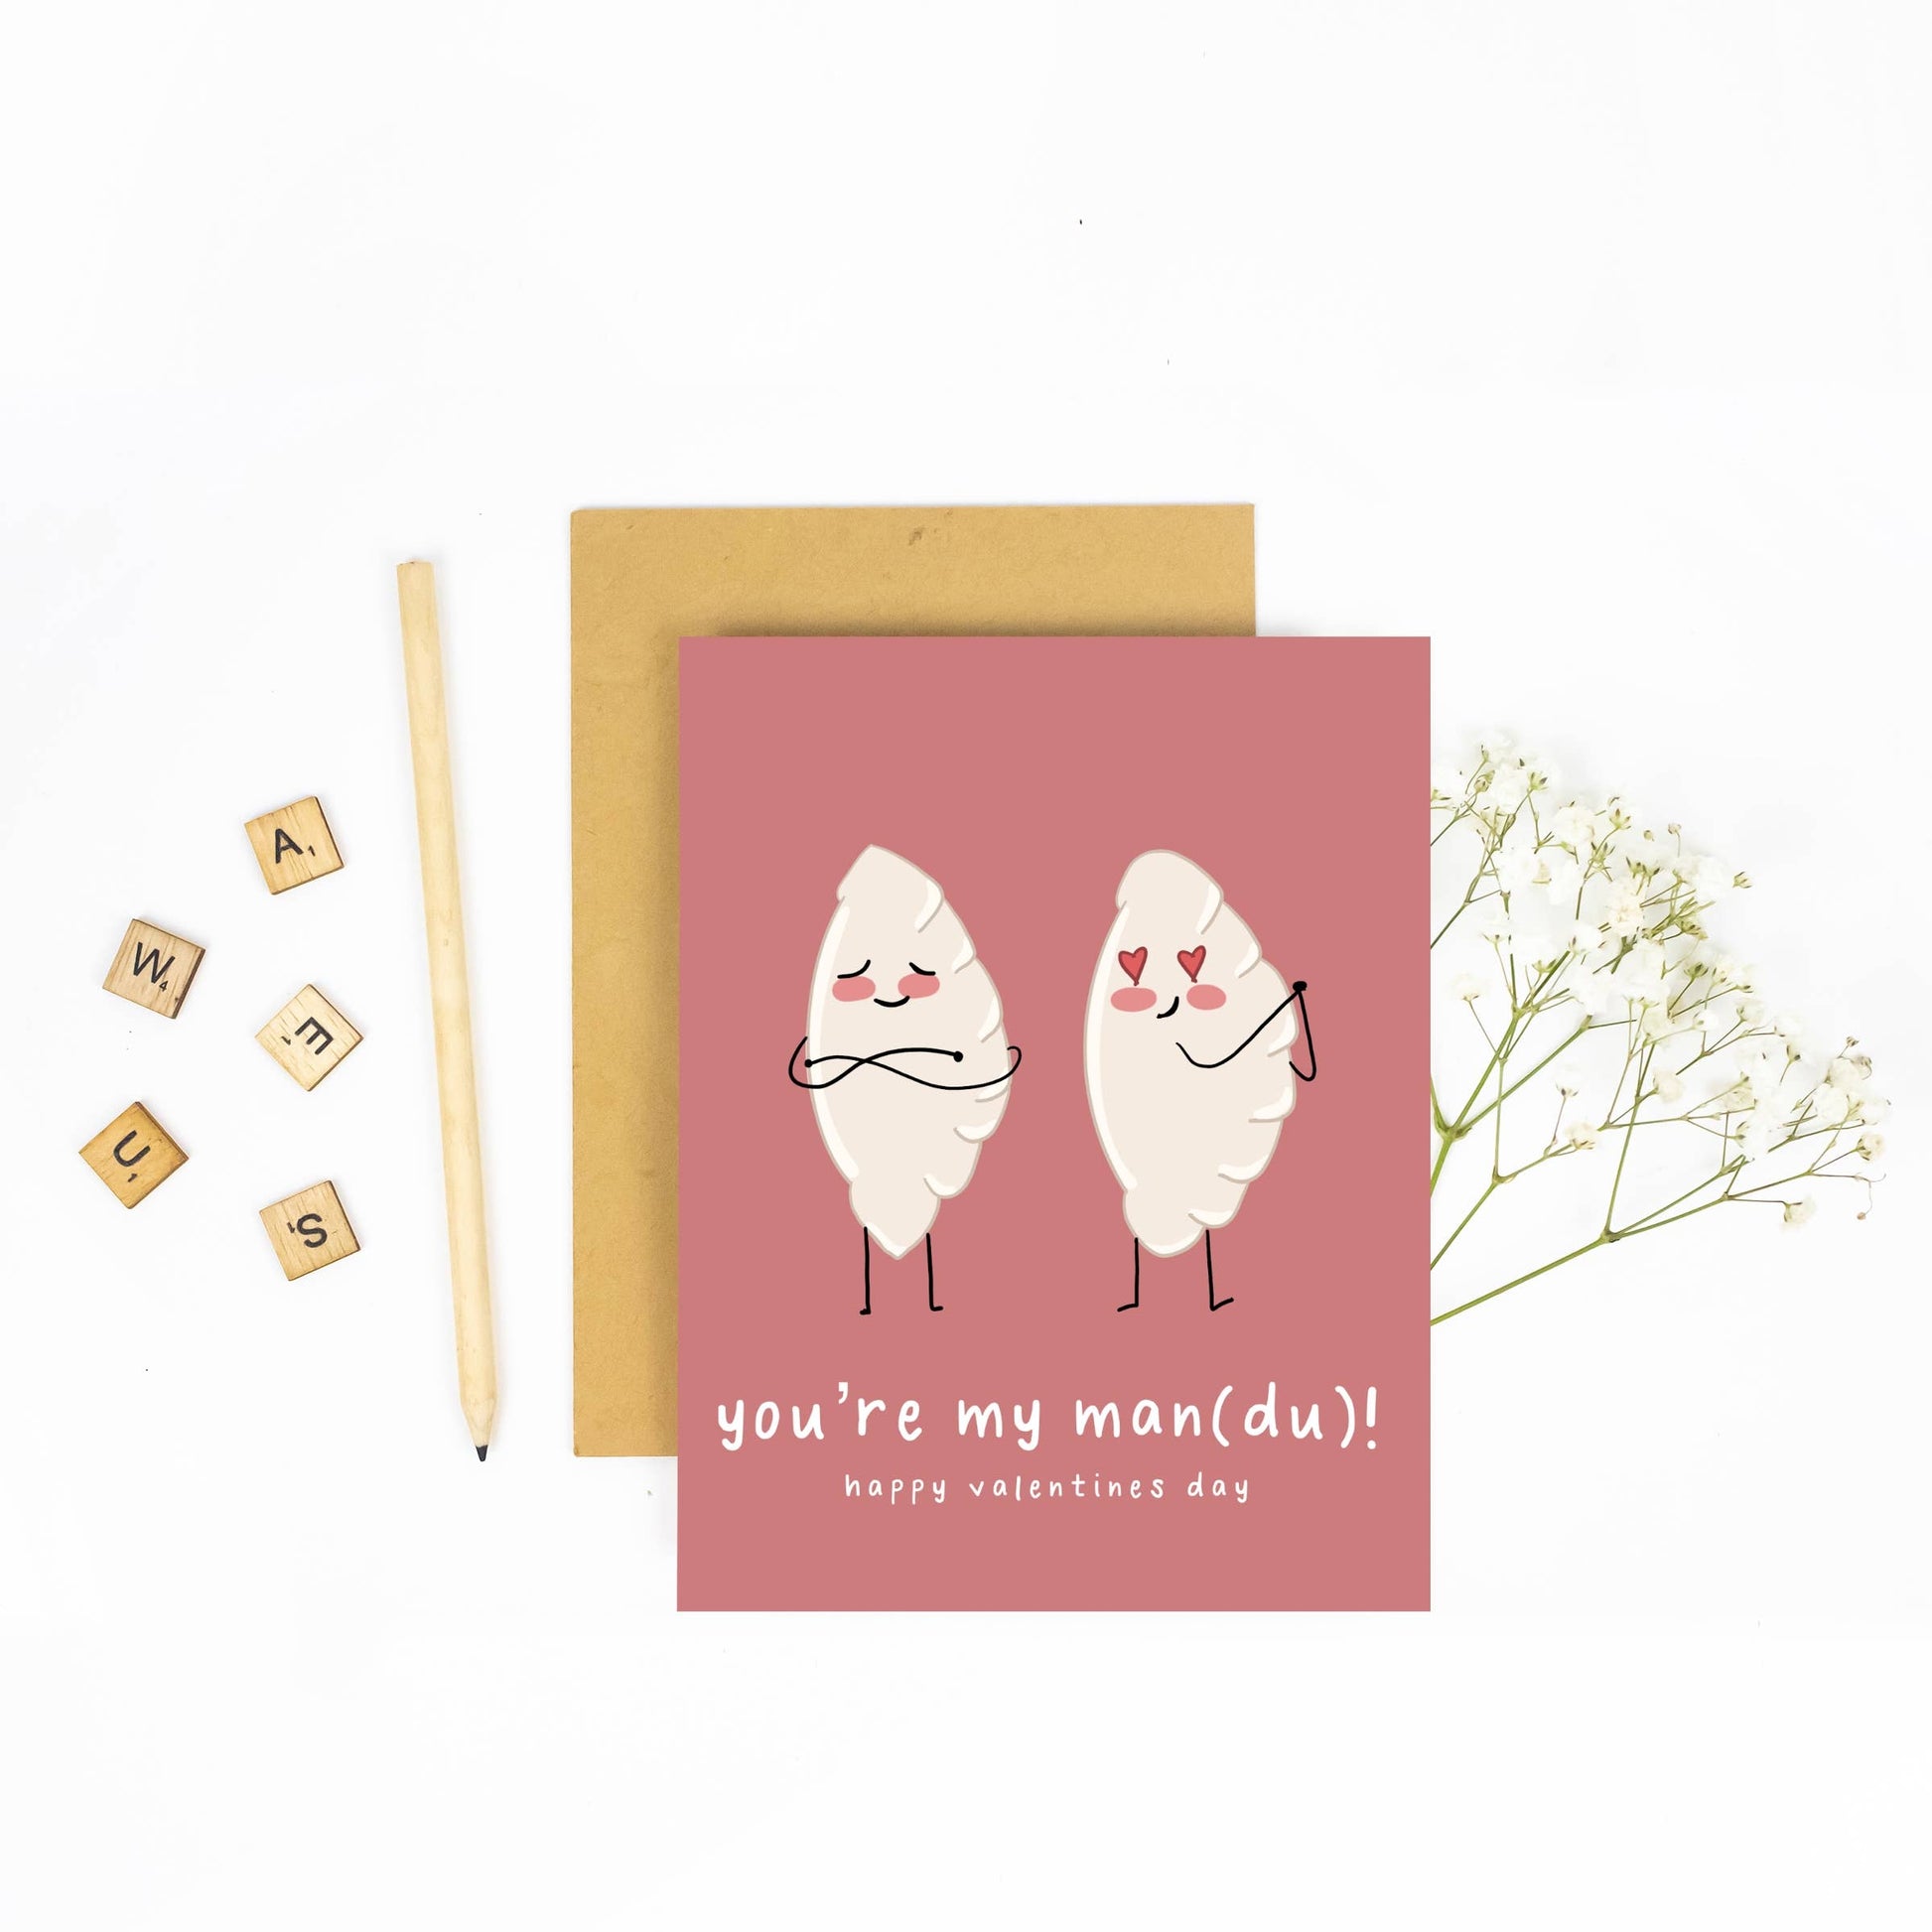 Pink greeting card with illustration of two mandu (korean dumplings) and text "you're my man(du)! happy valentine's day"